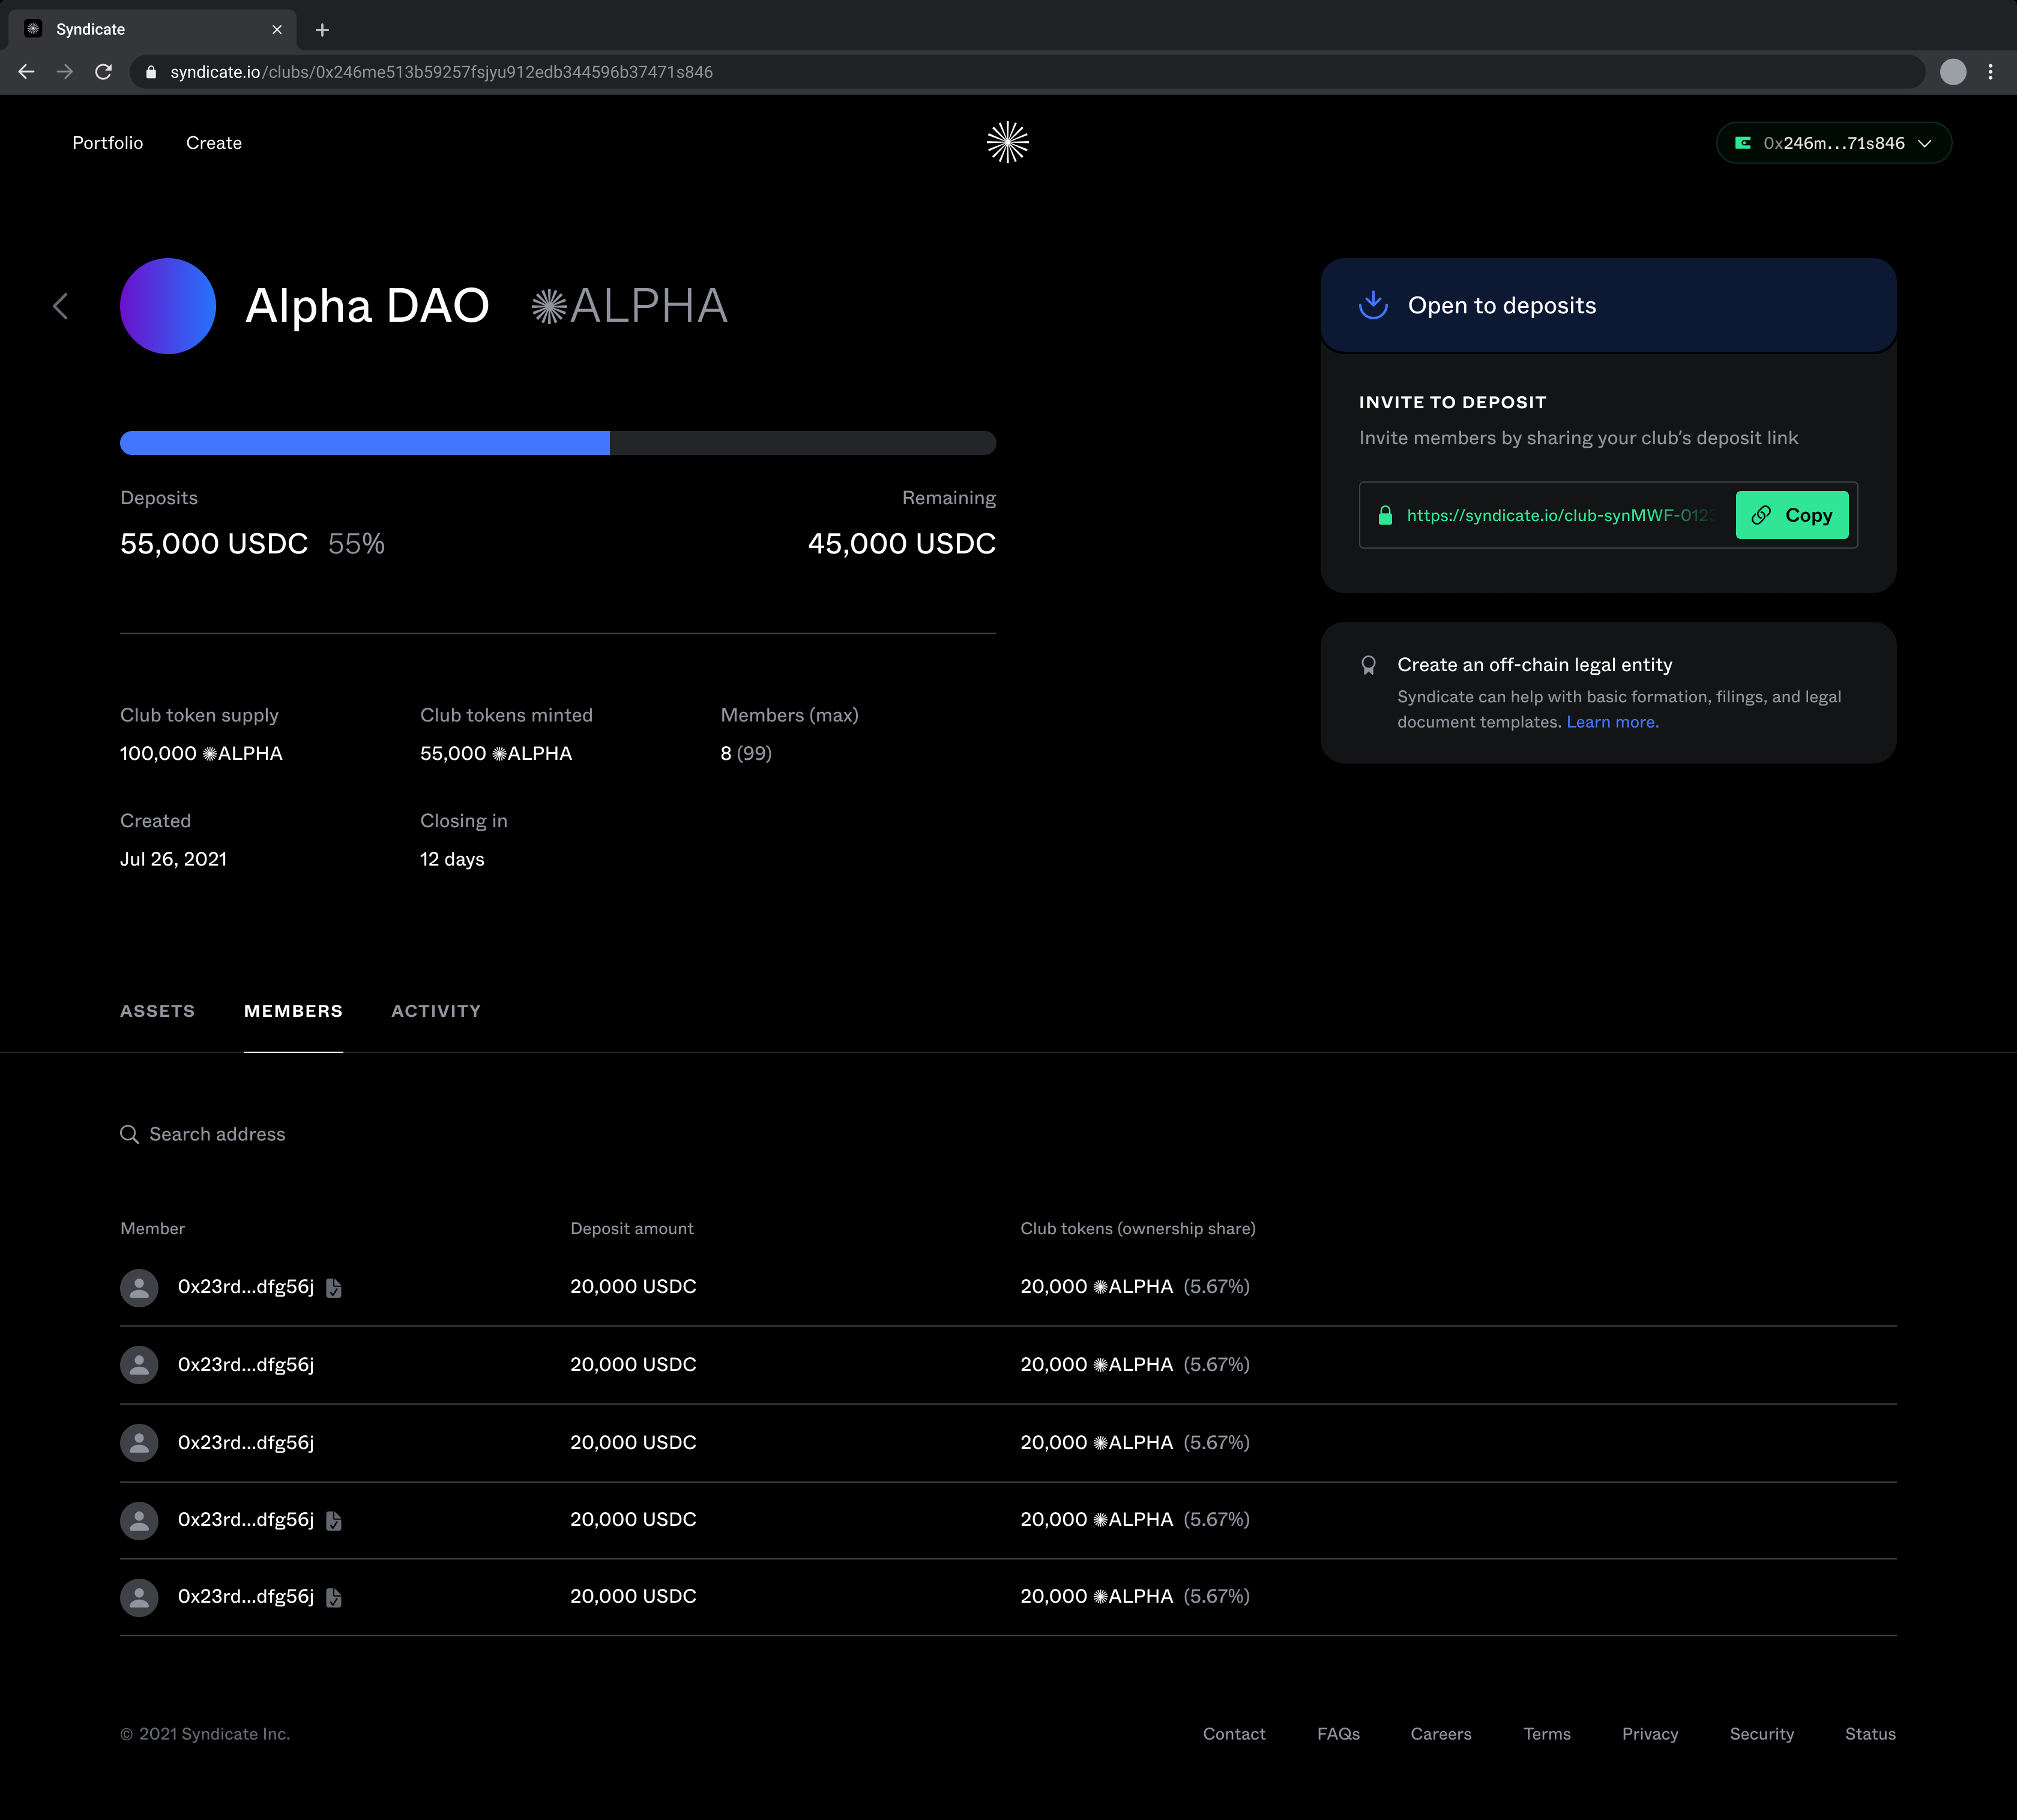 DAO dashboard for investment clubs on Syndicate